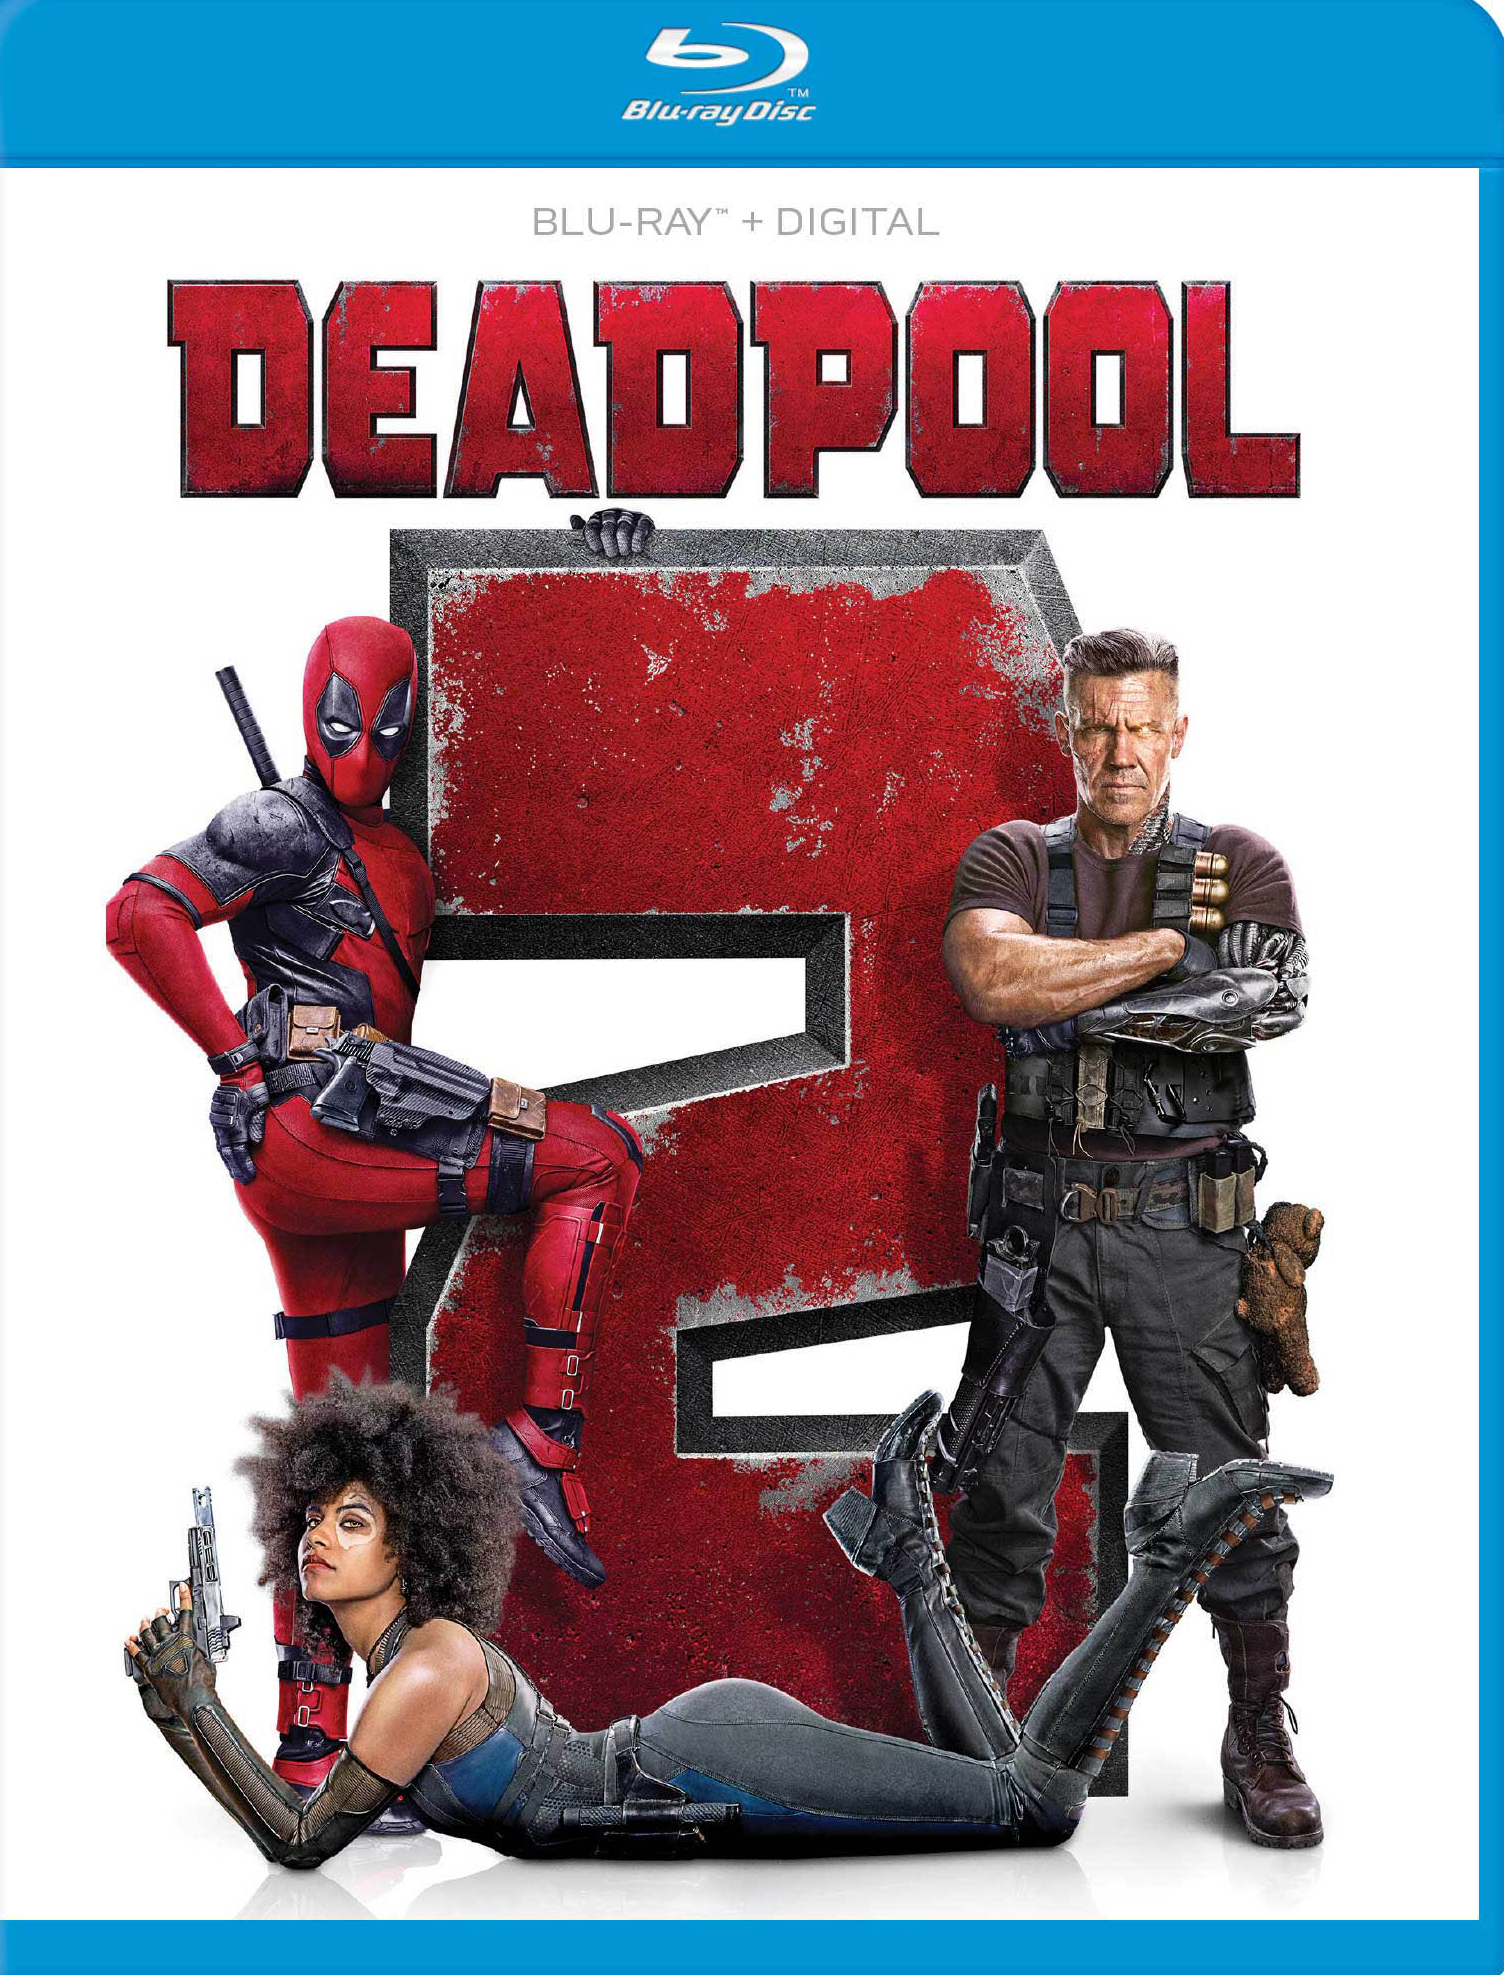 DEADPOOL Gets A Blu-ray Release Better Stuffed than Any